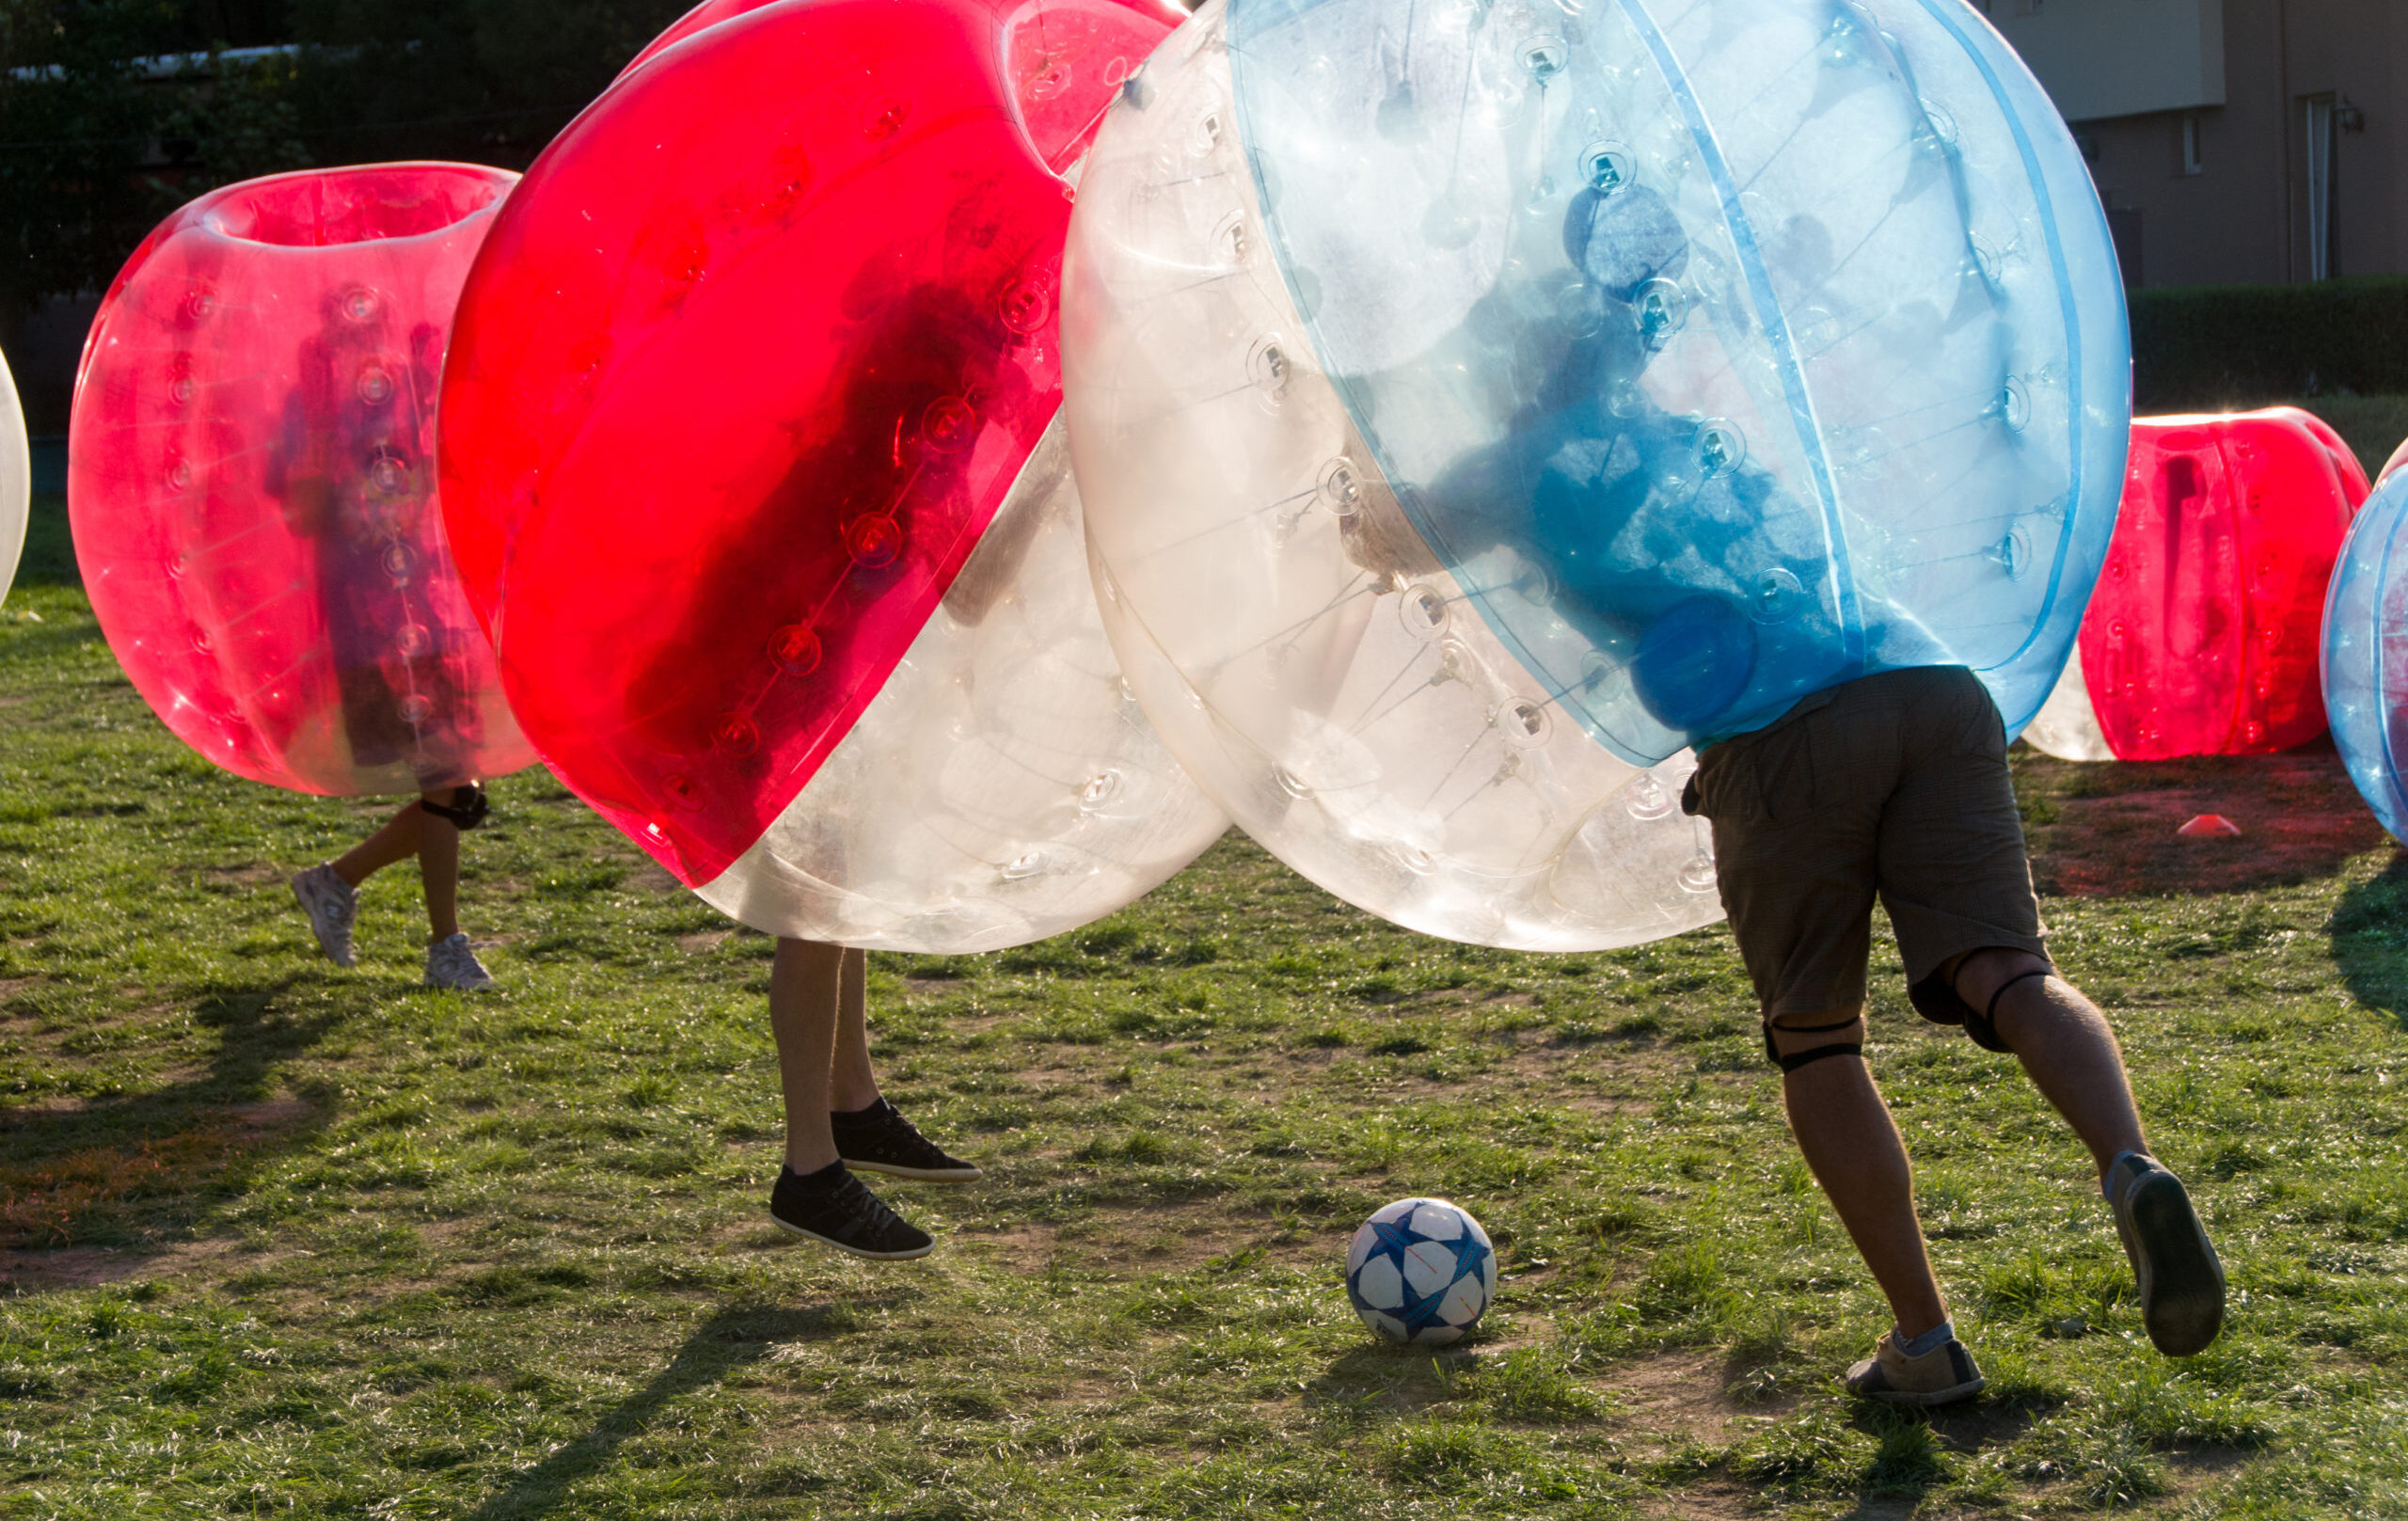 Teenagers play in Bubble bump, new and fun team game outdoor. Children are inside of blown plastic transparent bubble shock each other with fun. Out of focus park zone is at background